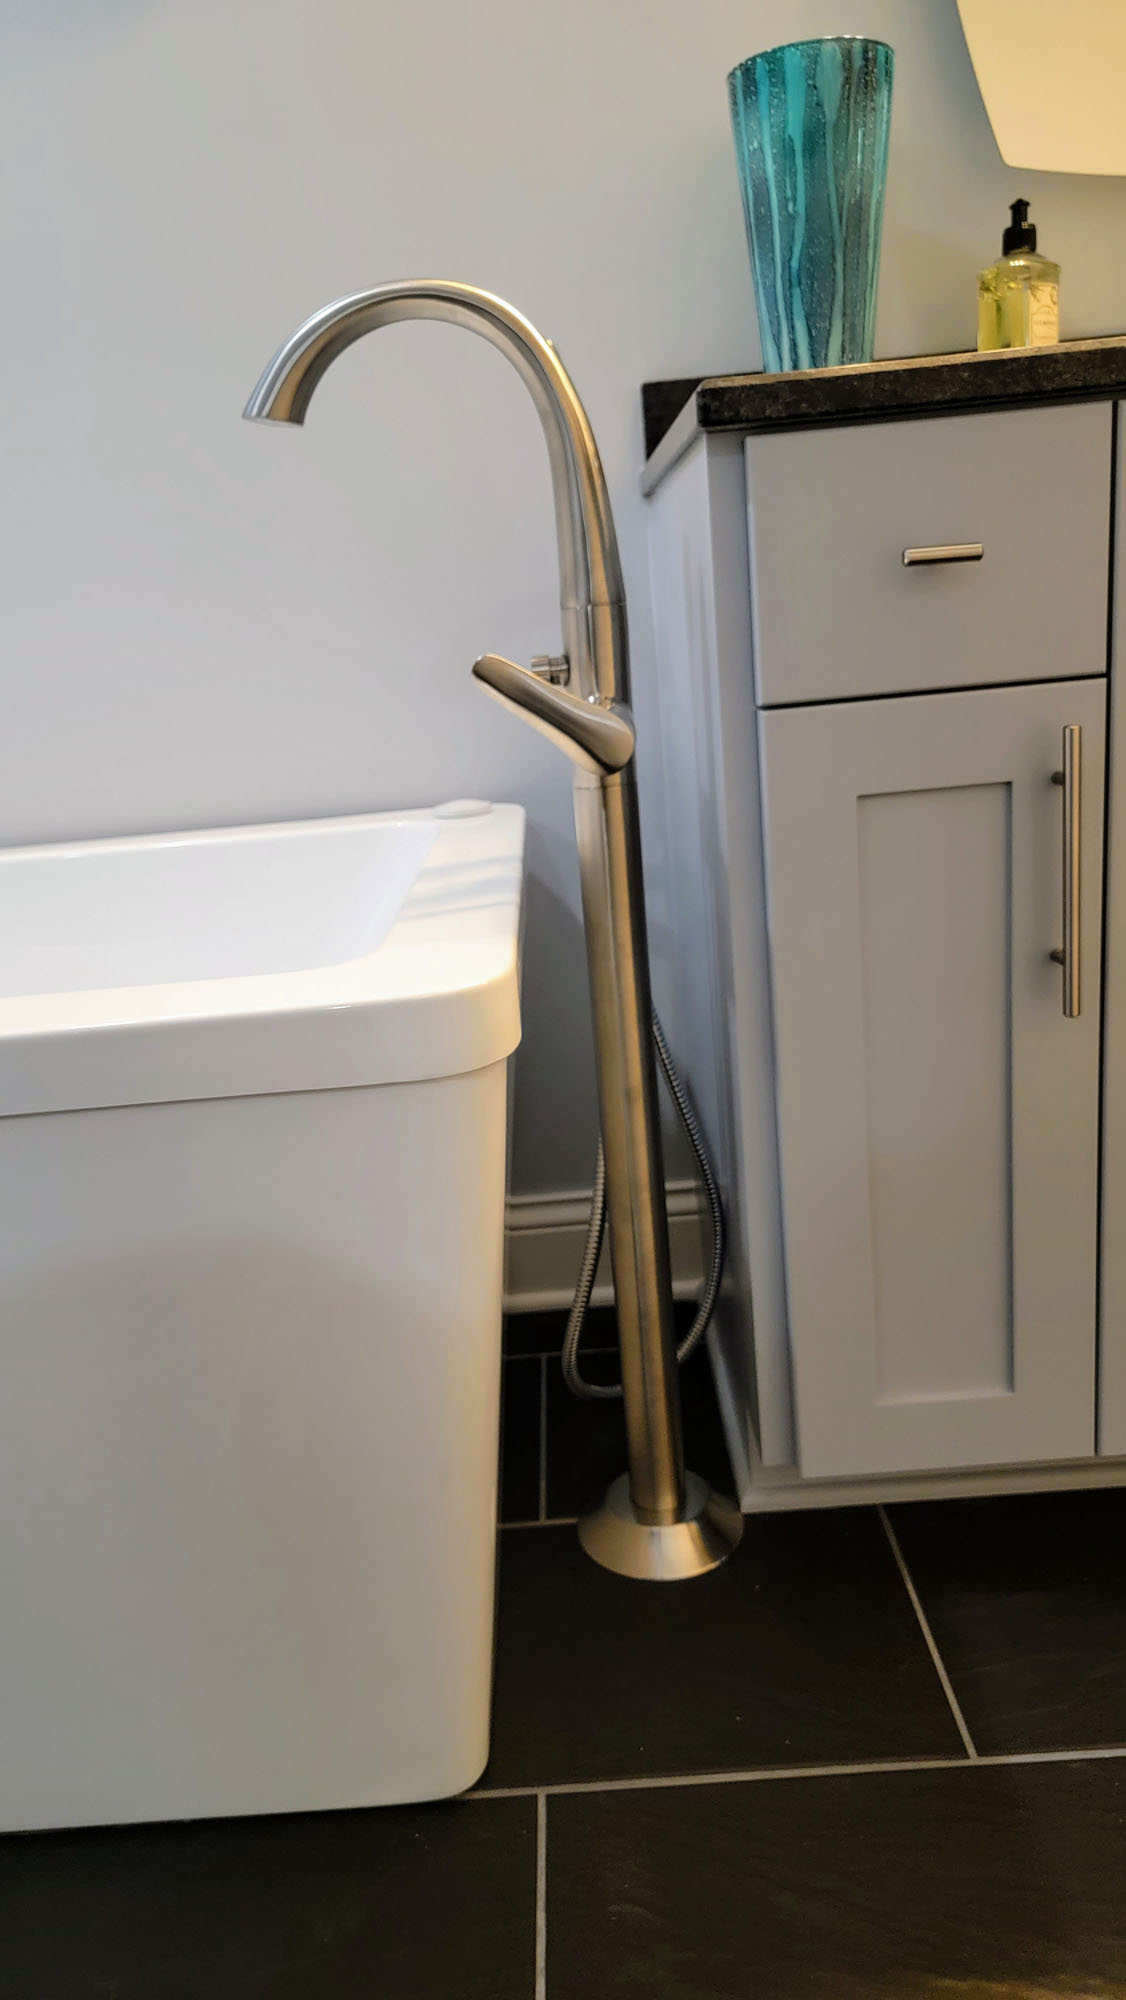 Jetted Tub floor mounted faucet